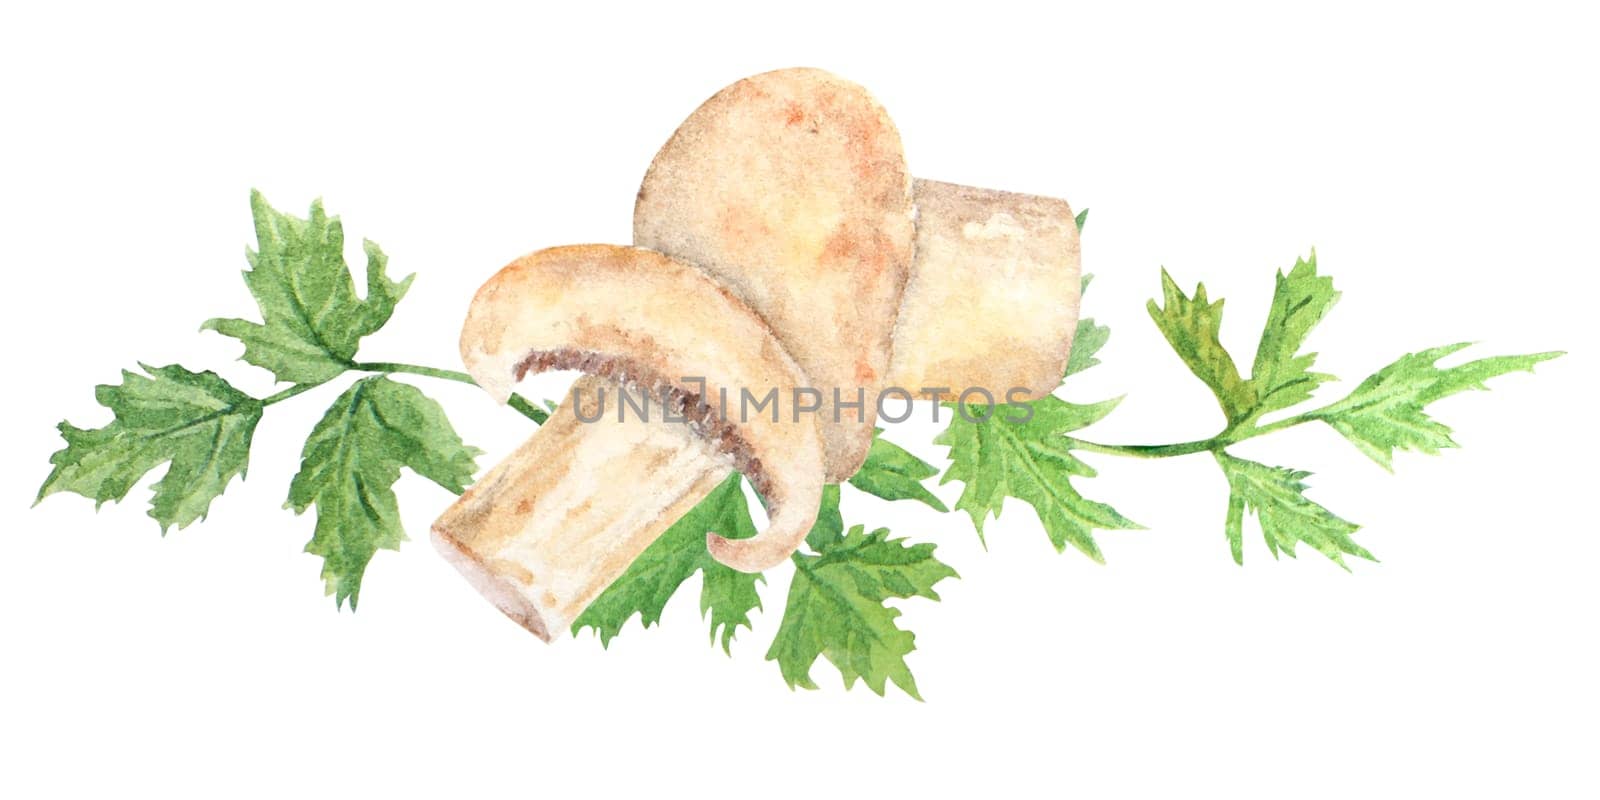 Watercolor illustration of champignons and green parsley leaves, hand drawn in watercolor and isolated on a white background. Great for printing on fabric, menus and more.